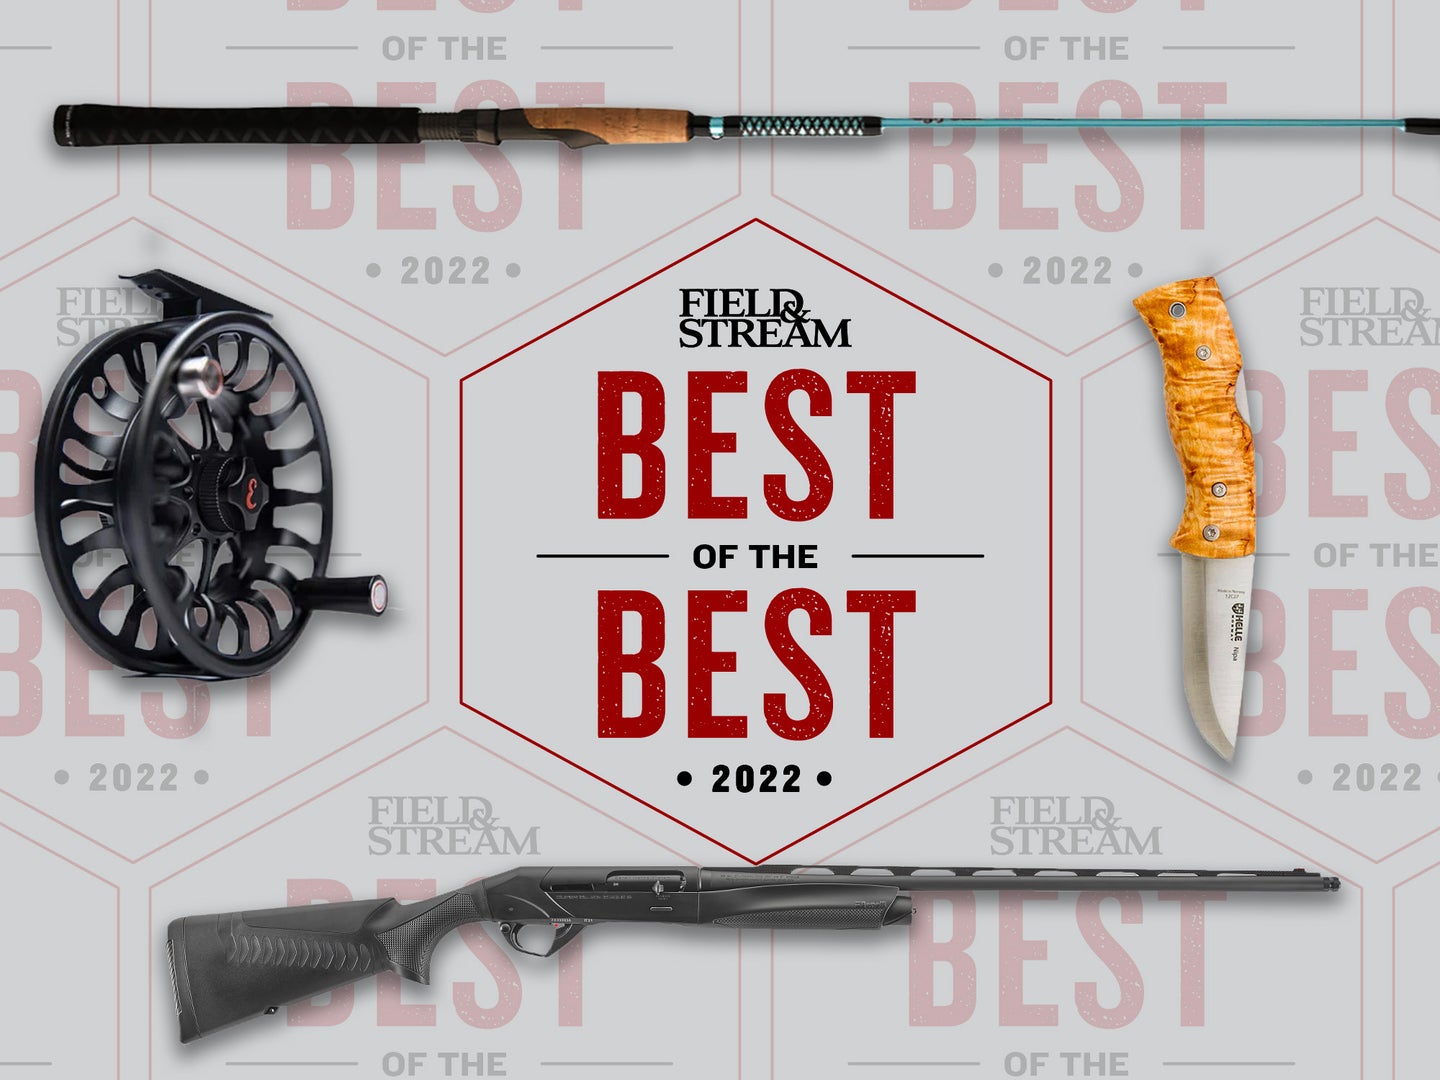 The Best Hunting Gear and Fishing Gear of 2022